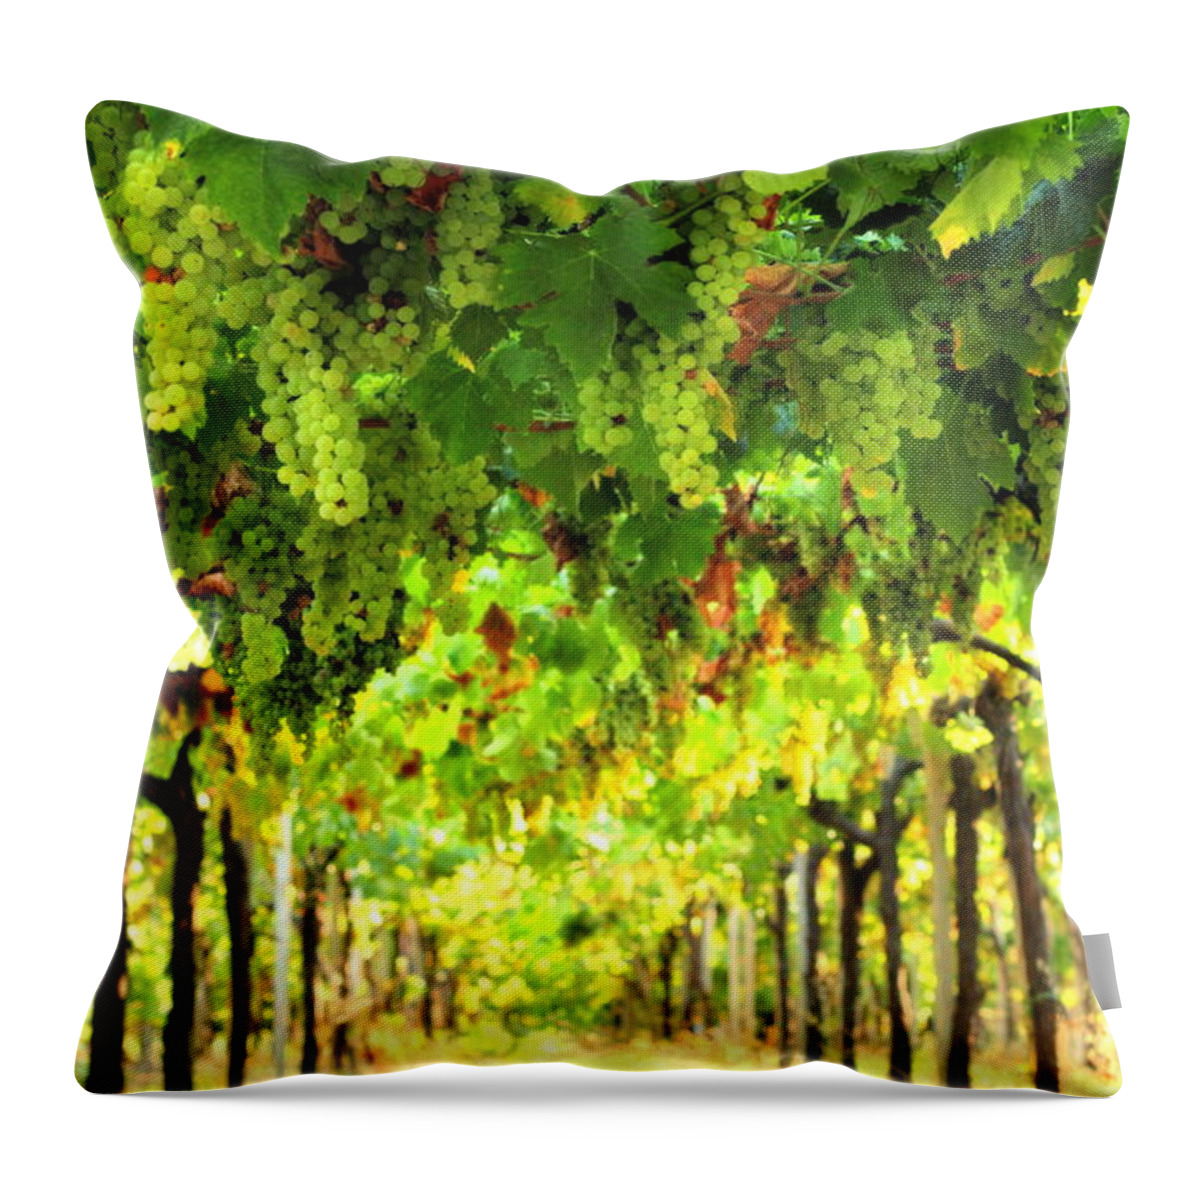 Vineyard Throw Pillow featuring the photograph Trellissed Grapes 3 by Angela Rath